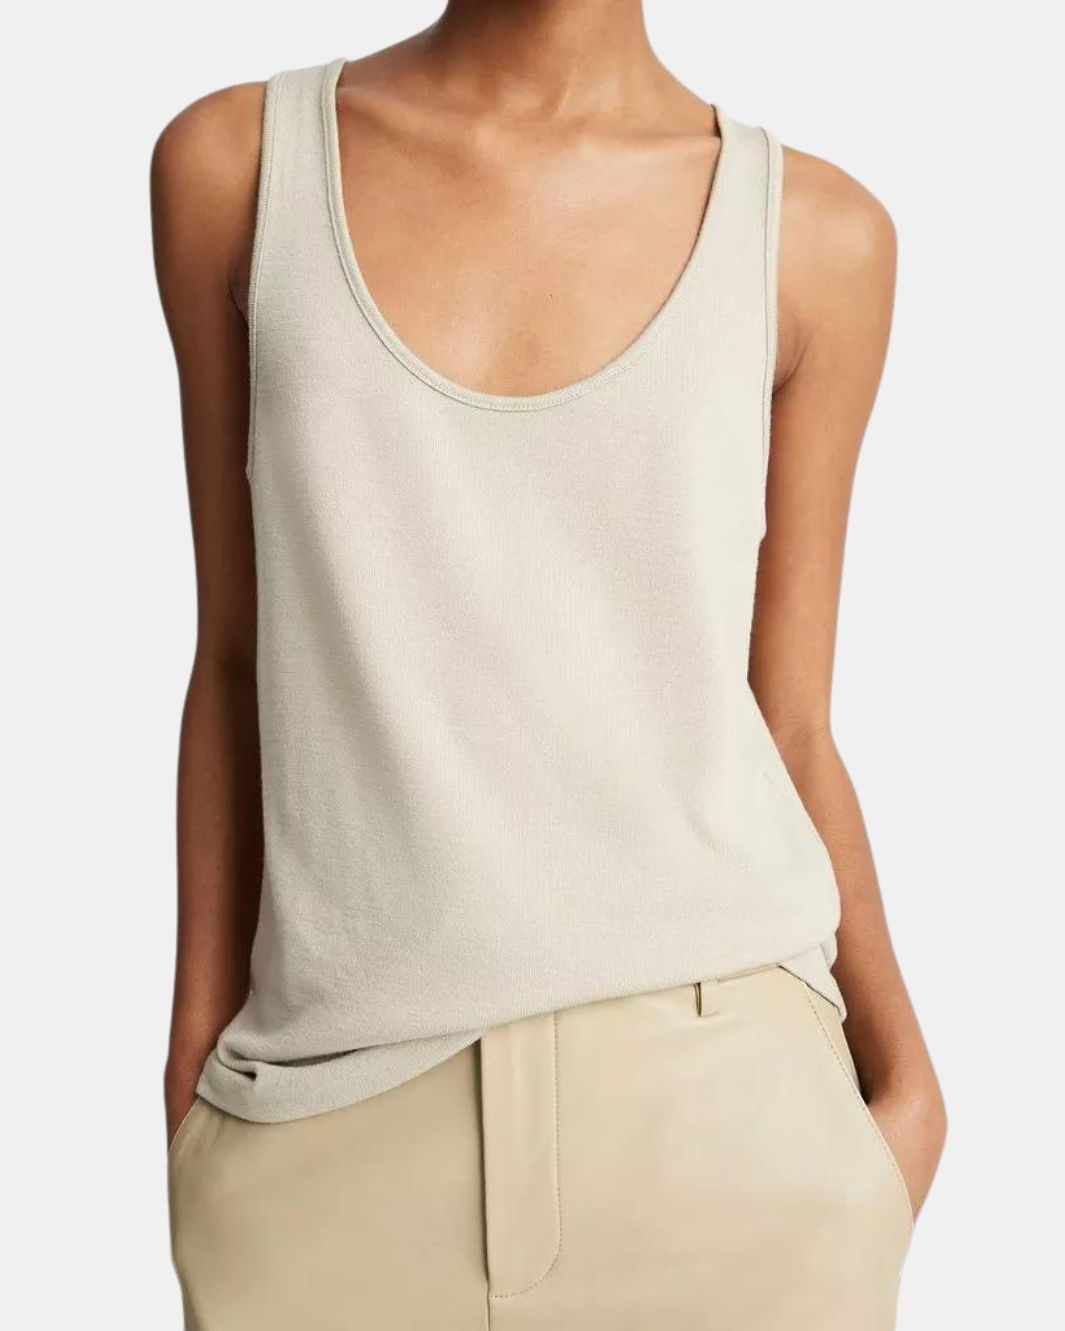 RELAXED SCOOP NECK TANK IN SEPIA - Romi Boutique